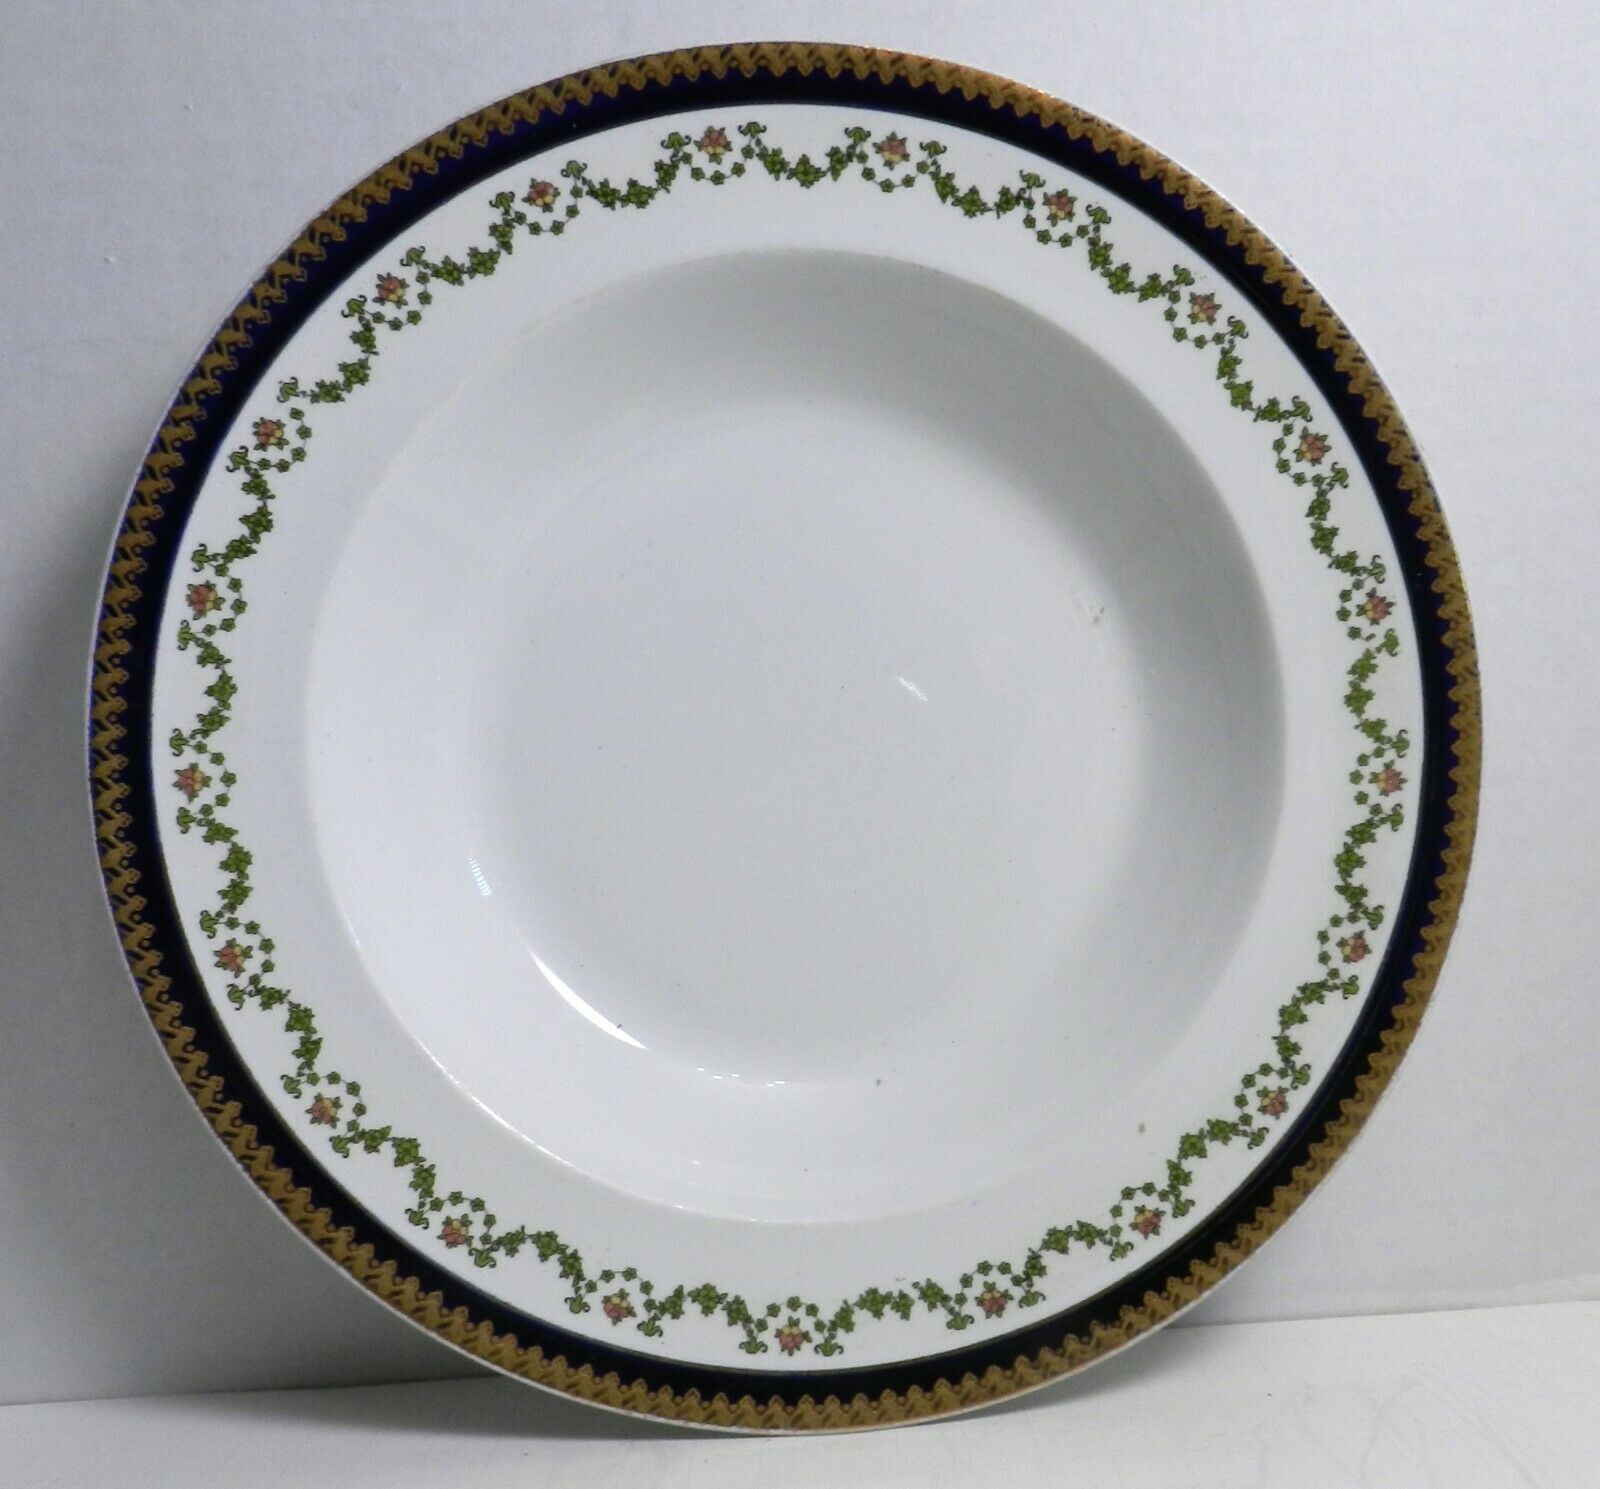 Pno-bx Booths Silicon China Or Repousse 10 3/4" Porcelain Soup Bowl Plate